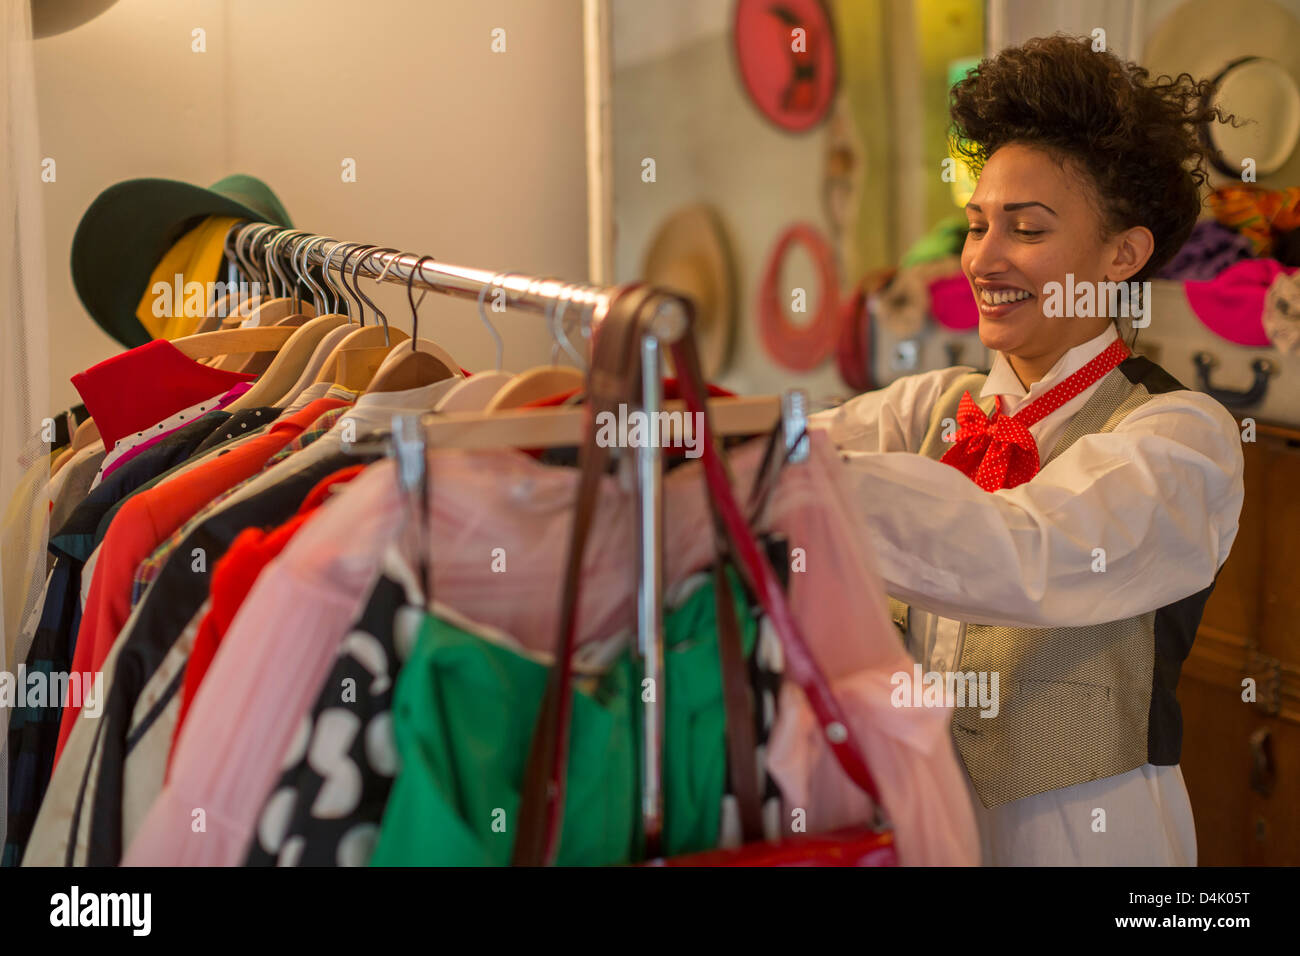 Woman shopping in clothes shop Stock Photo